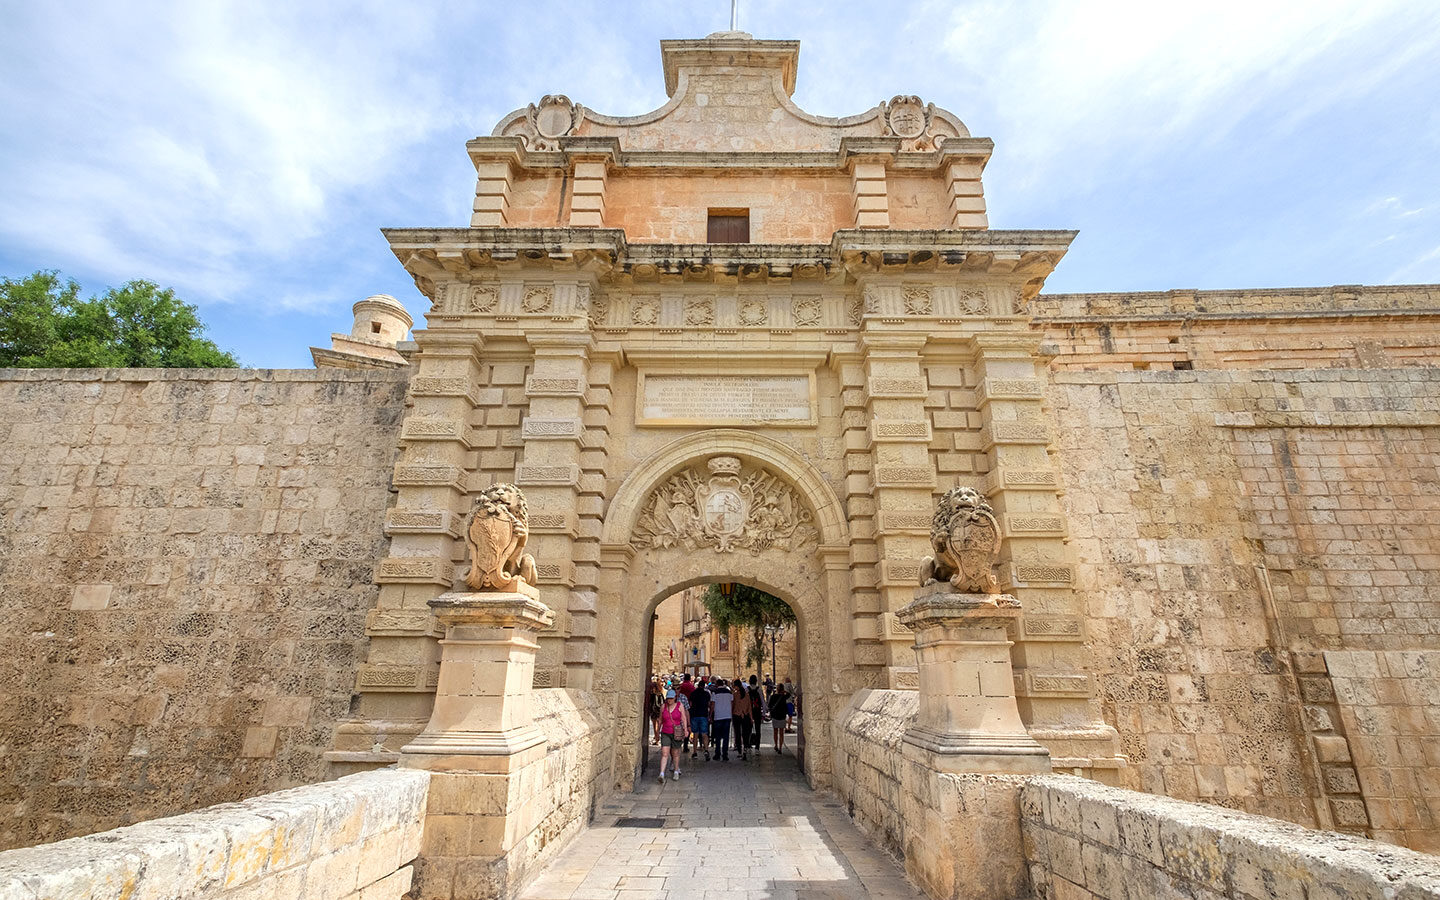 The Mdina Gate leading into the walled old town